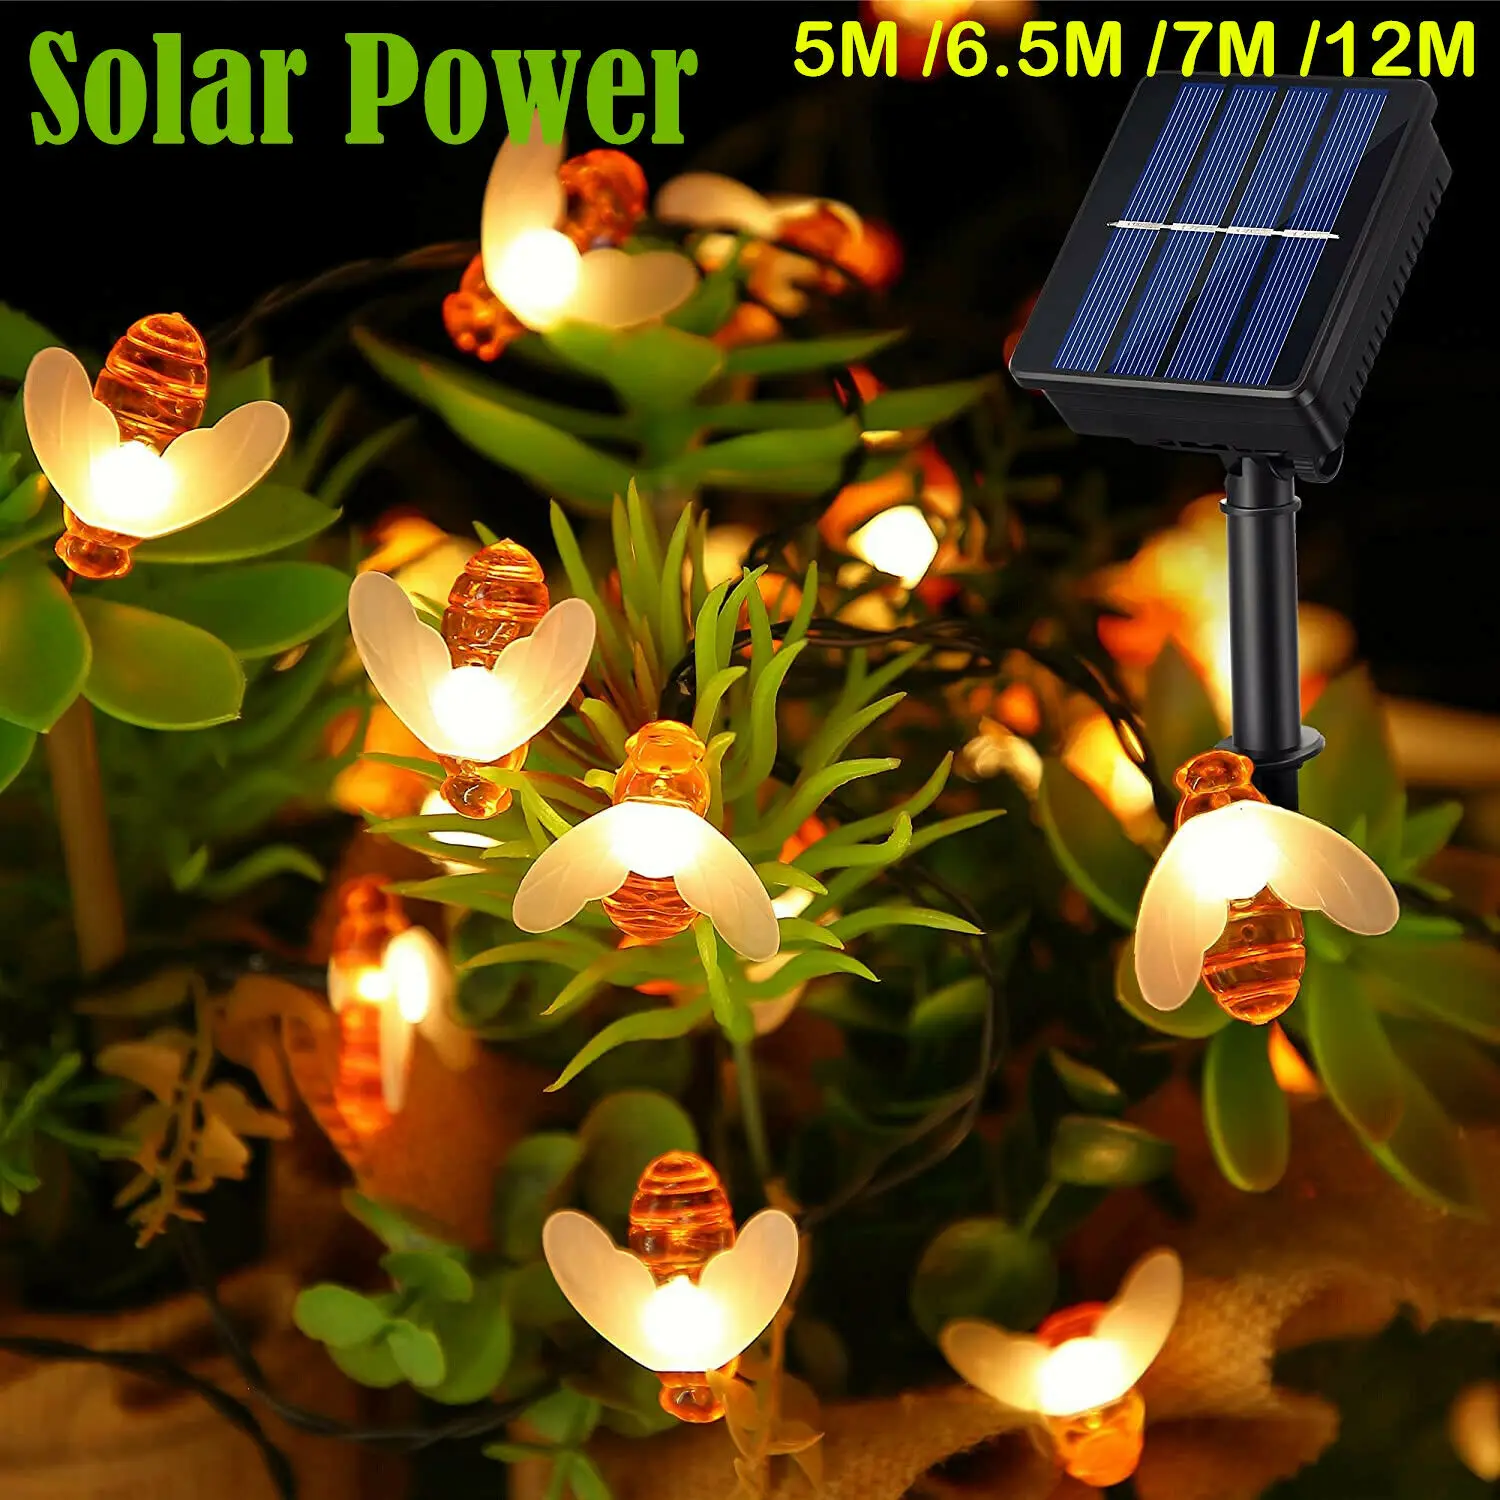 

20LED/50LED Solar Power Bee LED String Light Waterproof Garden Christmas Holiday Party Path Yard Decor Lamp Outdoor